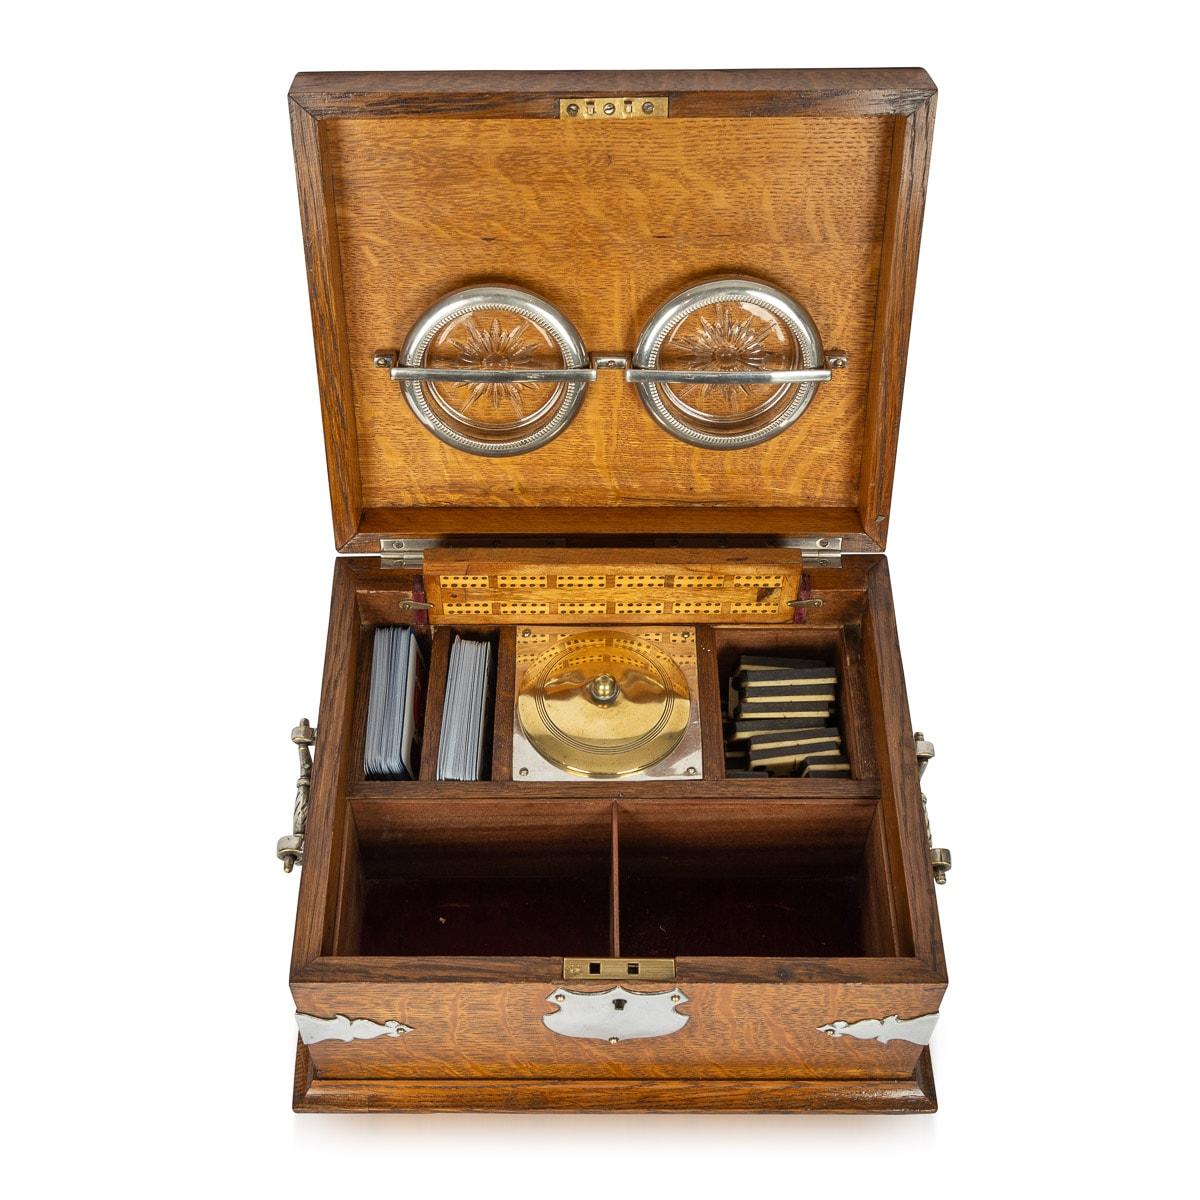 Antique 19th Century Victorian smoker's compendium box with additional games inside. The box has a stunning outside design featuring metal corner protectors, hinged carry handles and a blank plaque on the lid.

CONDITION
In Great Condition, some age